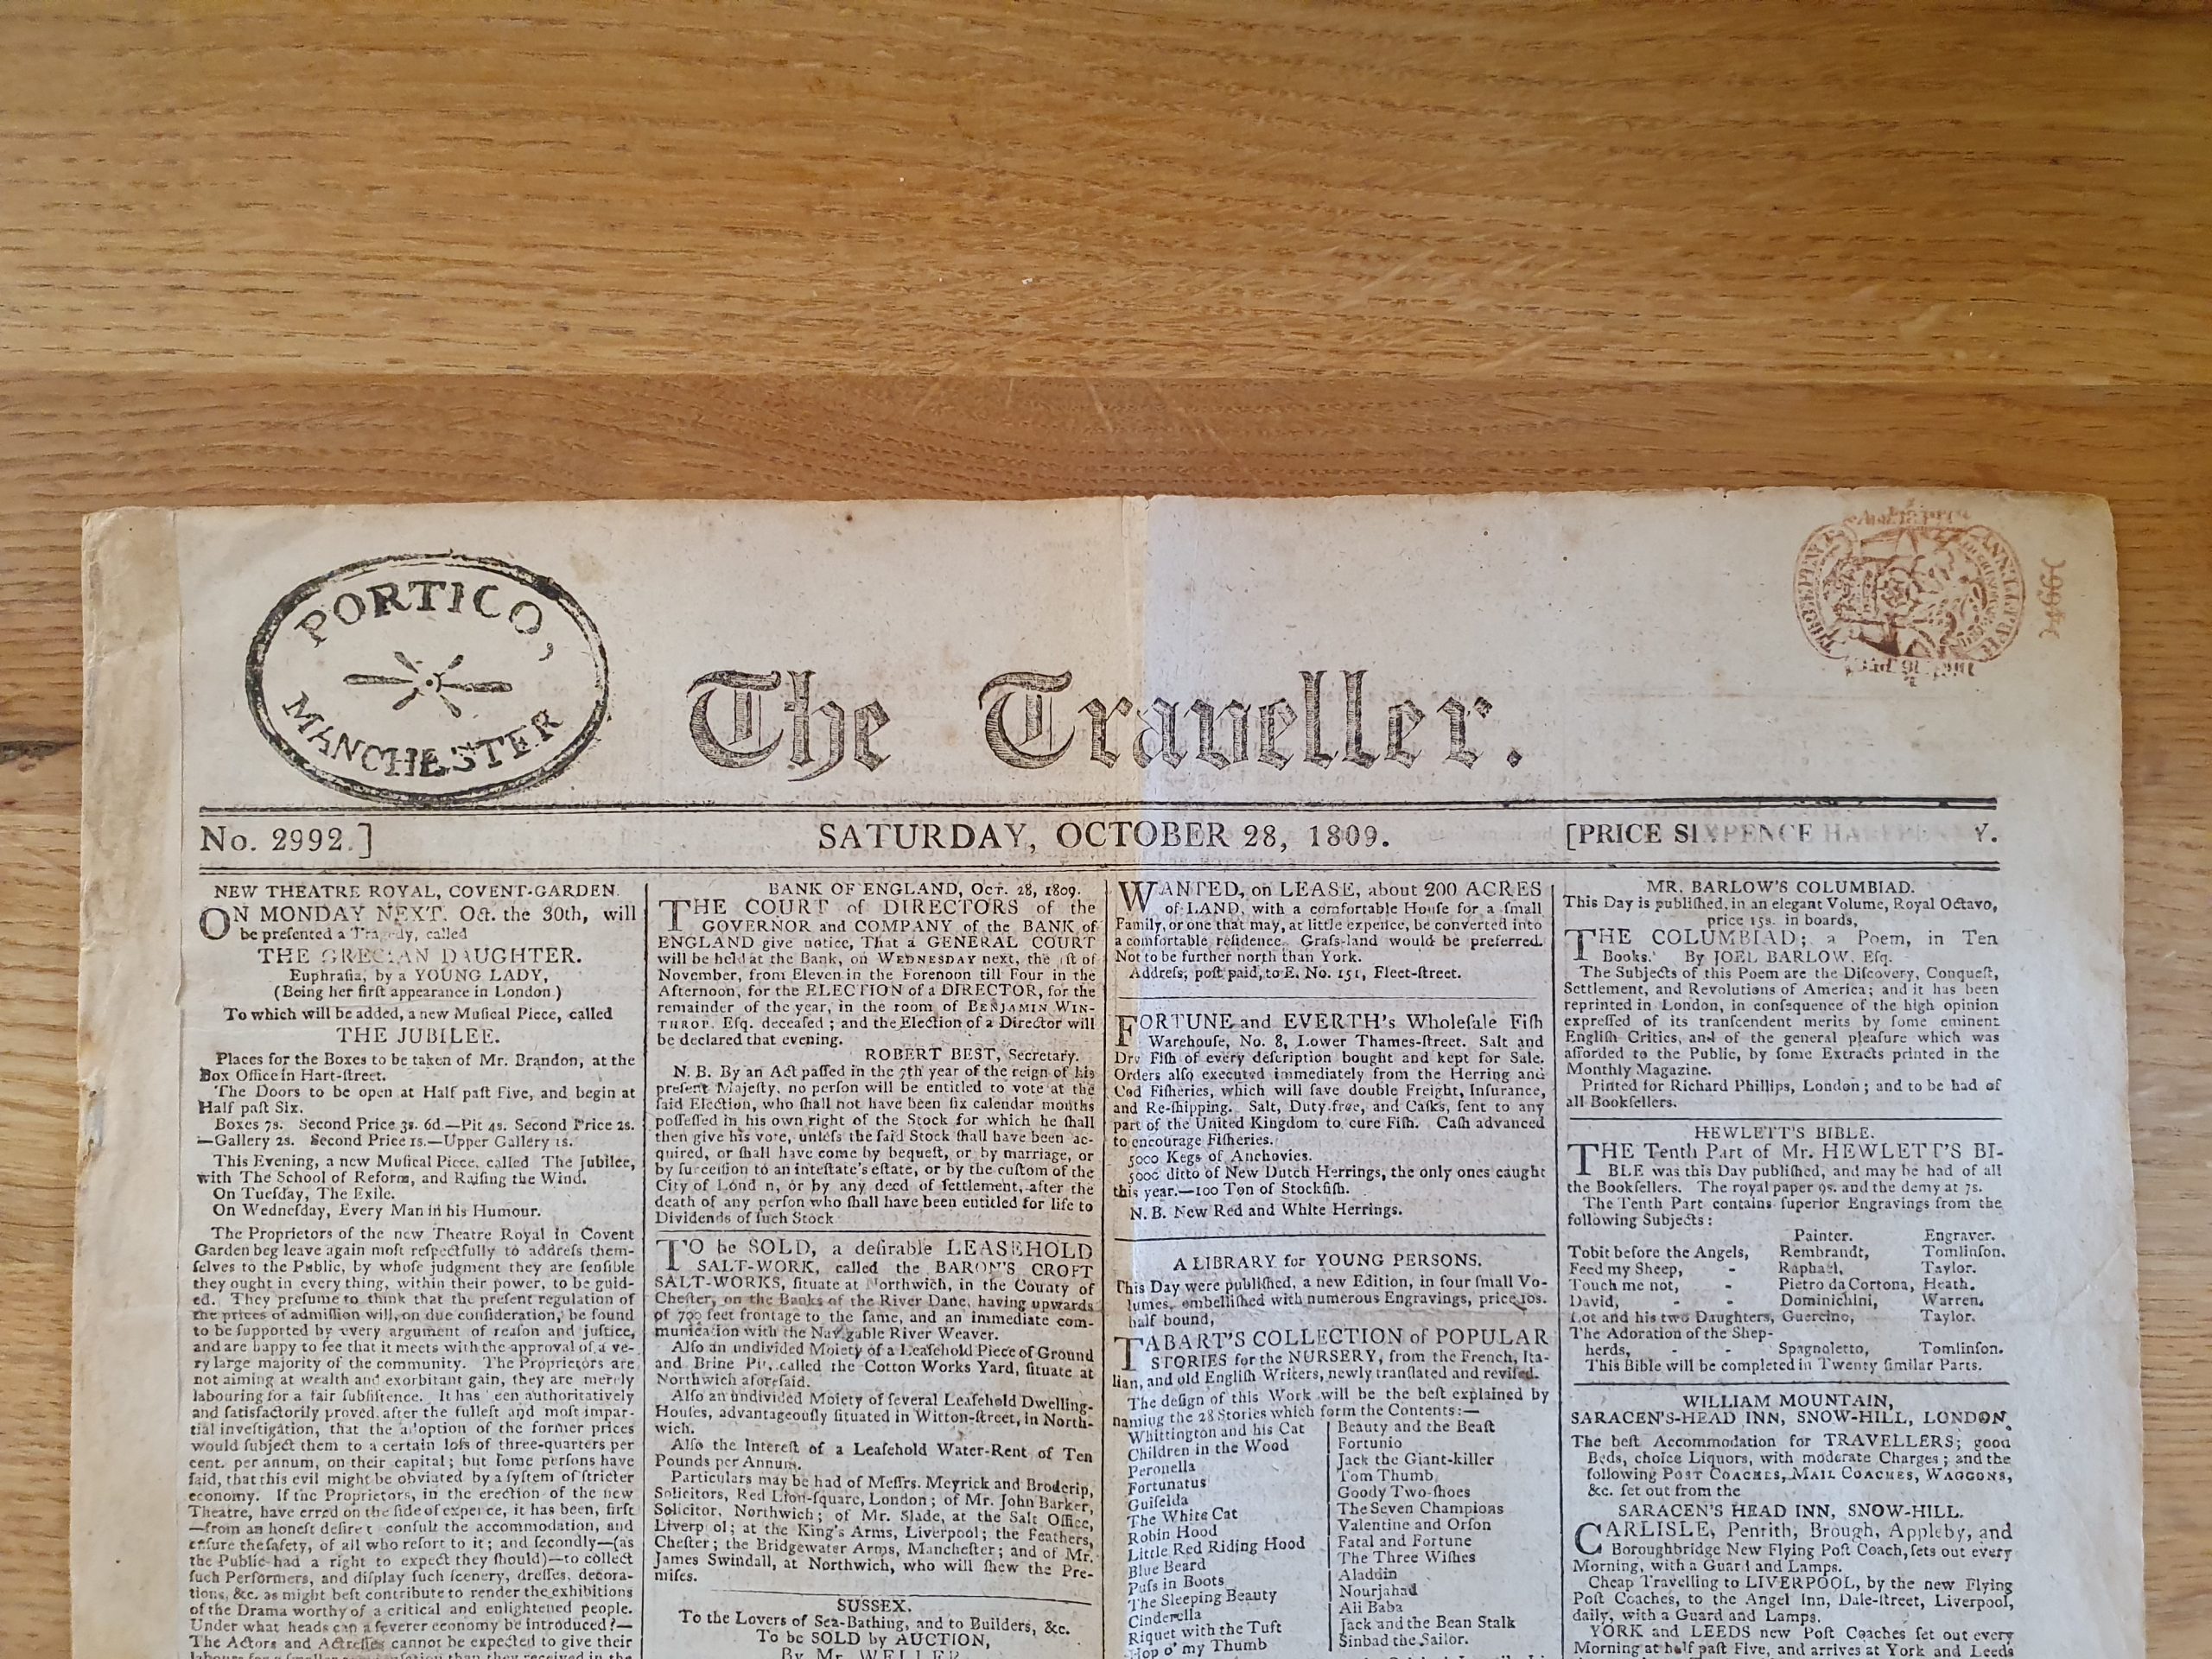 A Real Duel Told In The Newspaper (1809)